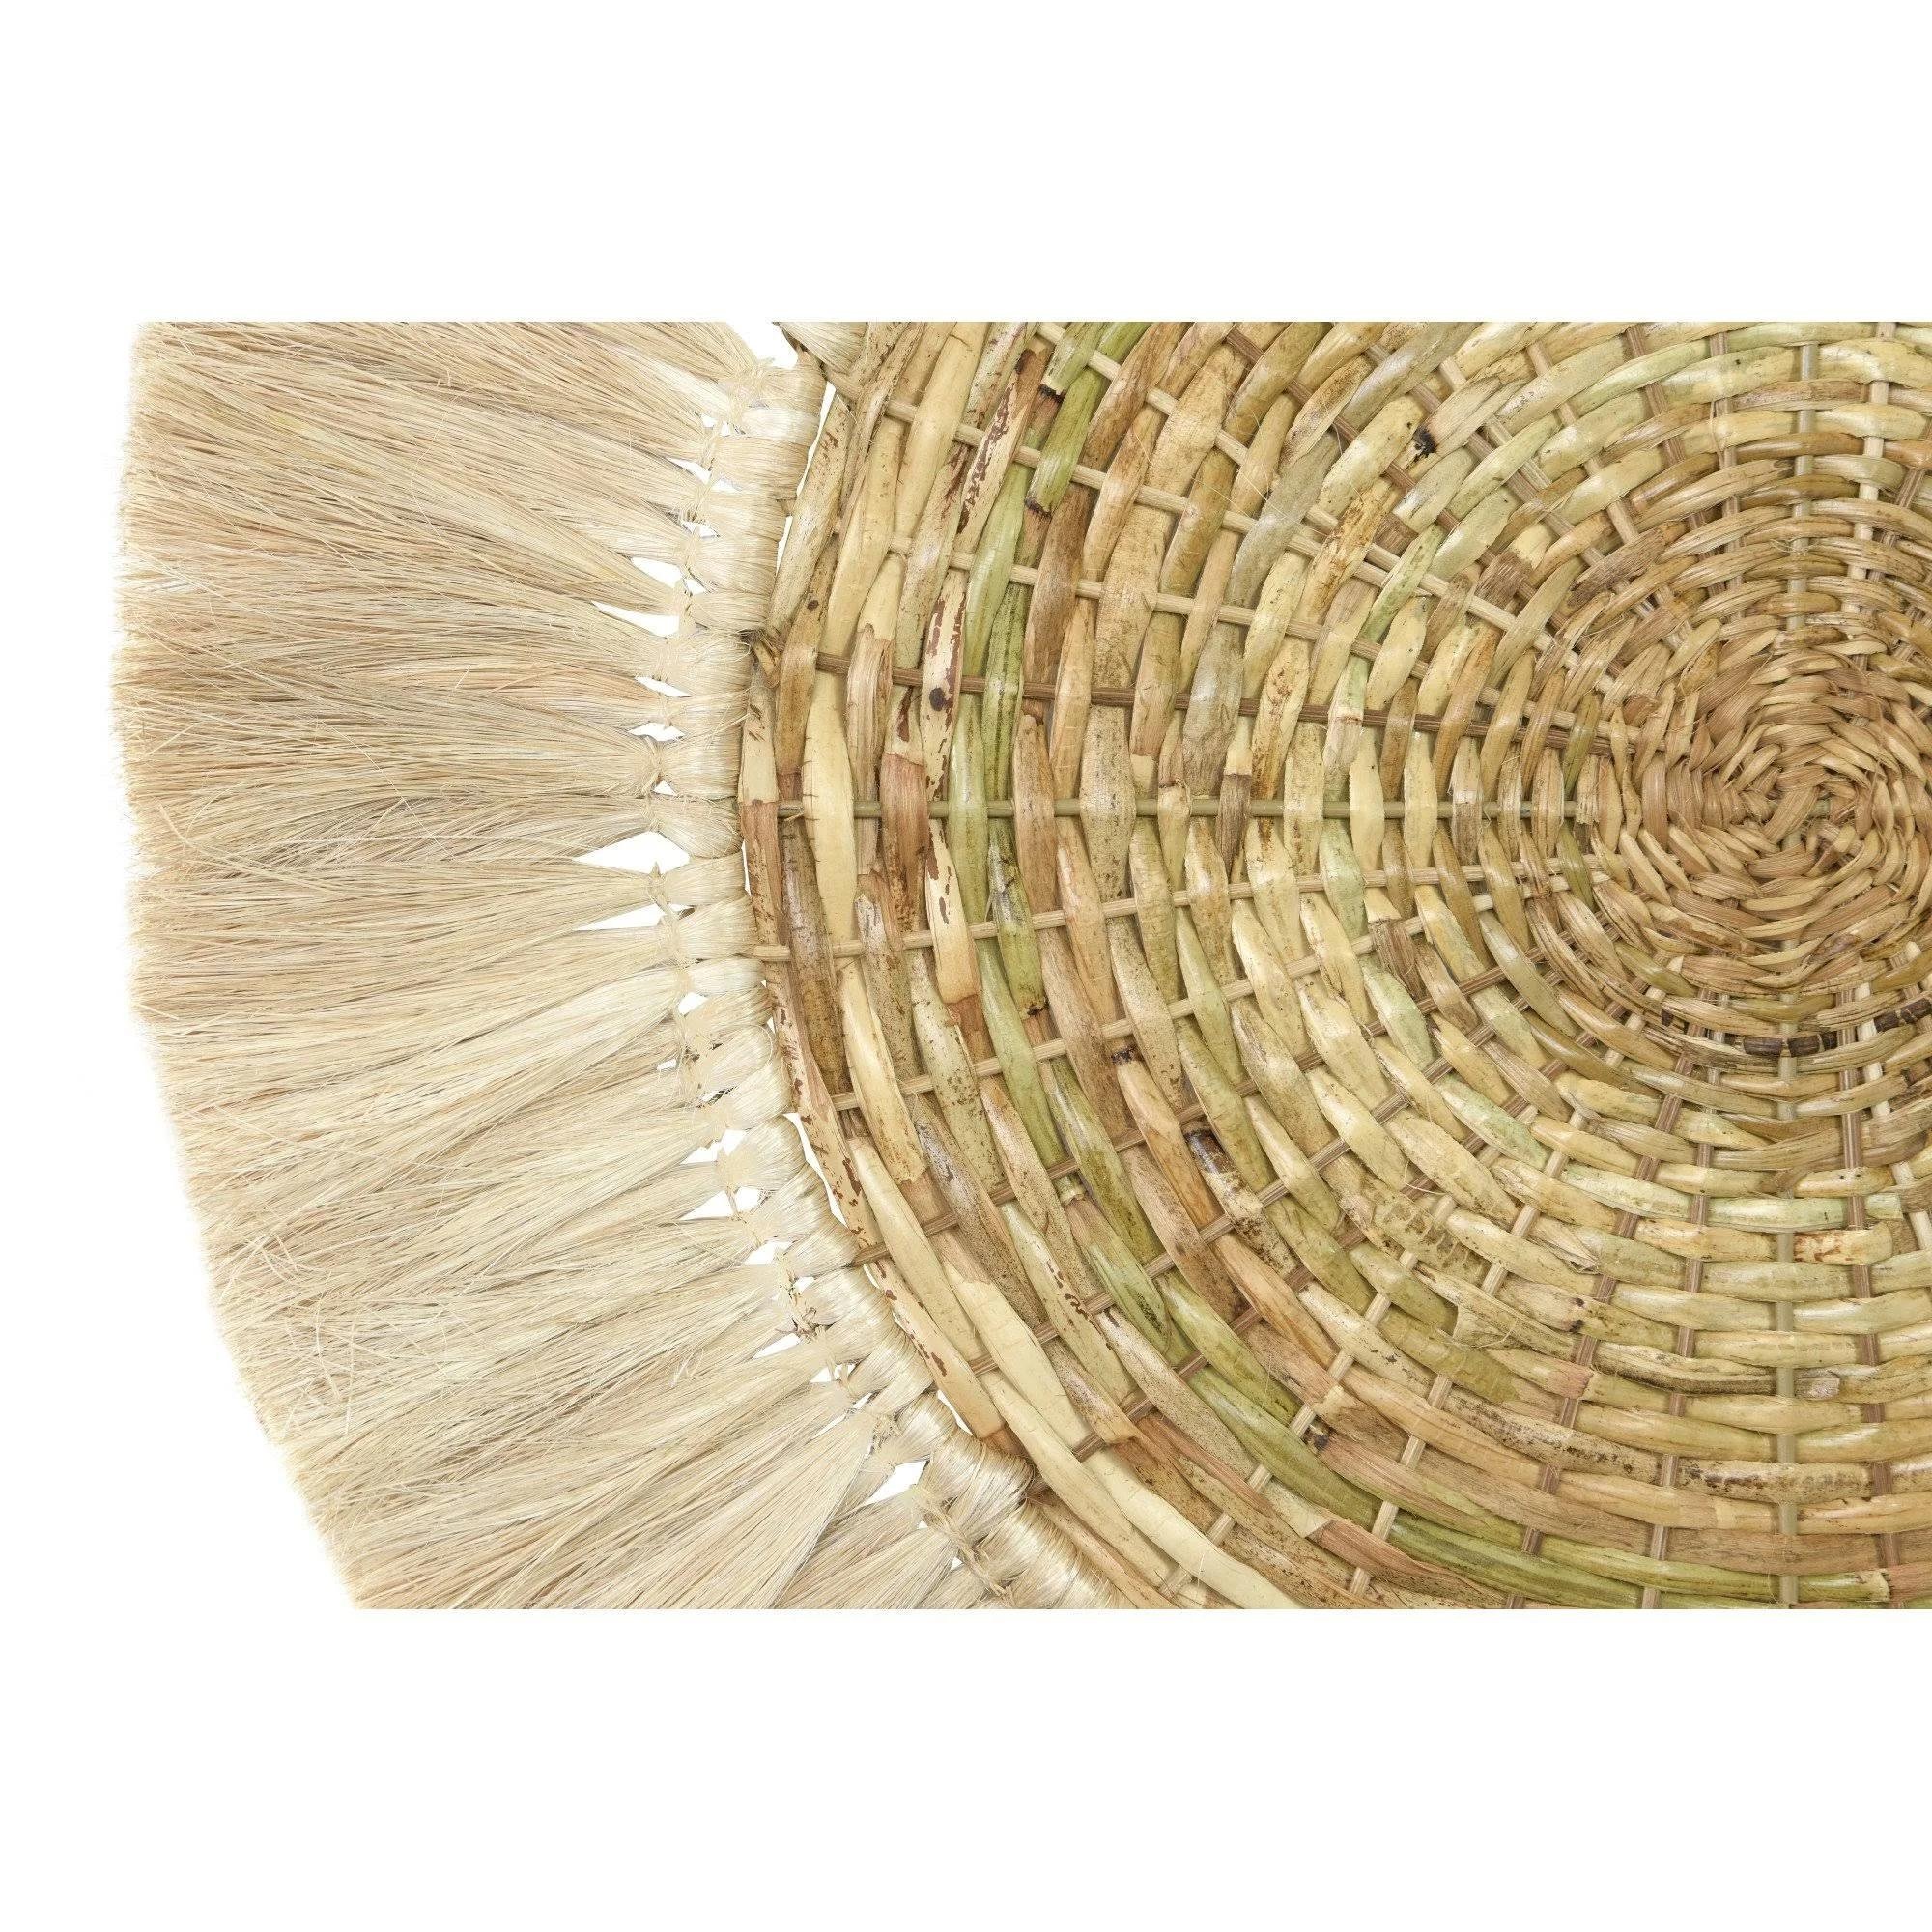 Handwoven Round Rattan & Abaca Wall Décor, 28" - Image 4